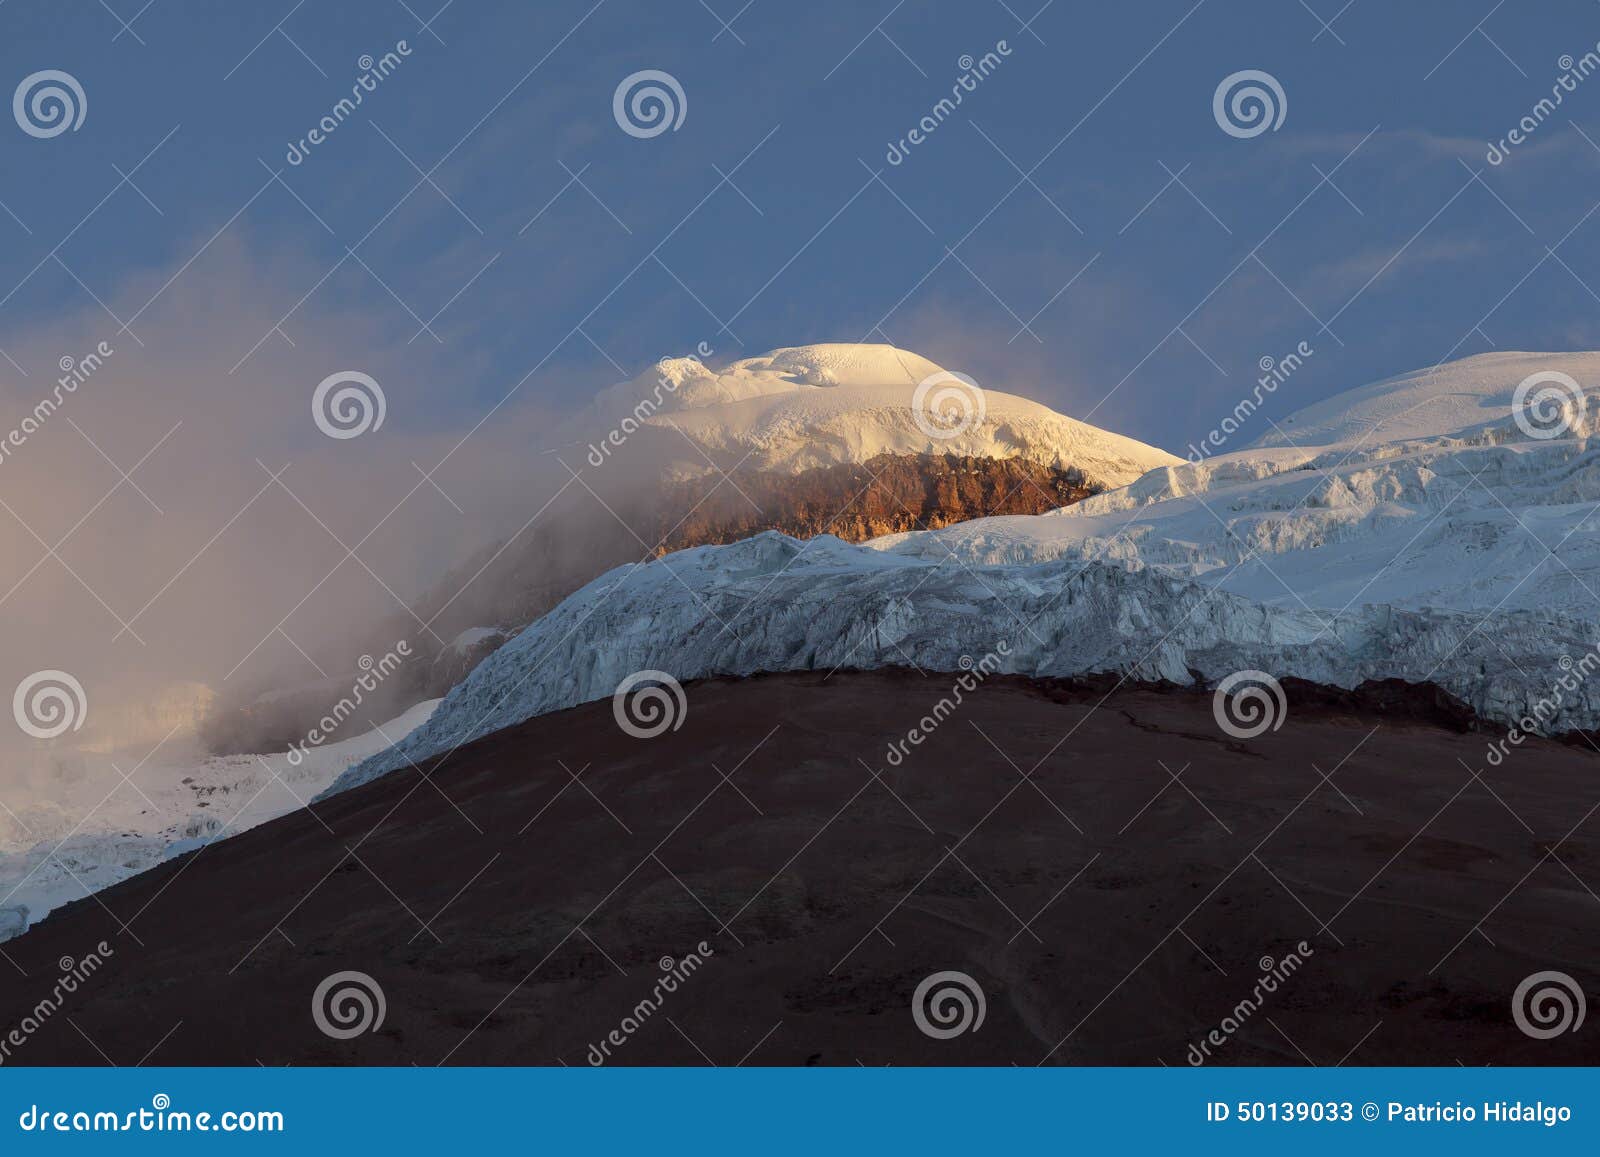 summit and yanasacha rock wall in the cotopaxi at dusk